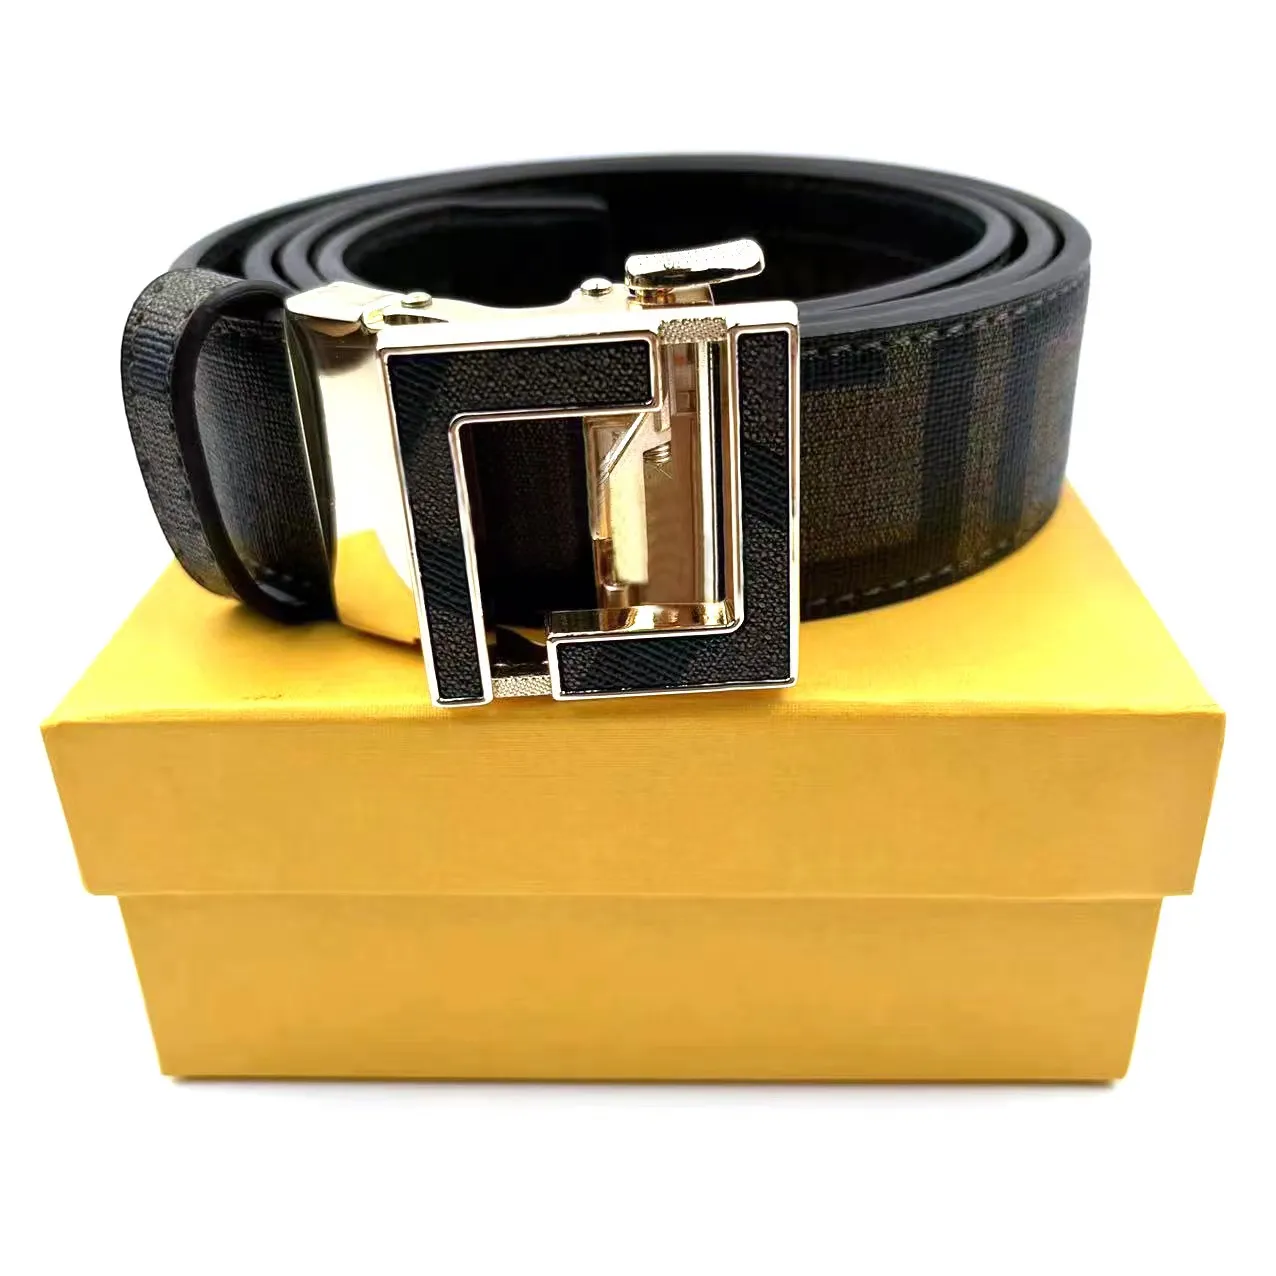 Men Designers Belts Letter Automatic Buckle Women Fashion Belt High Quality Genuine Leather Waistband ceinture luxe Width 3.5cm With Box